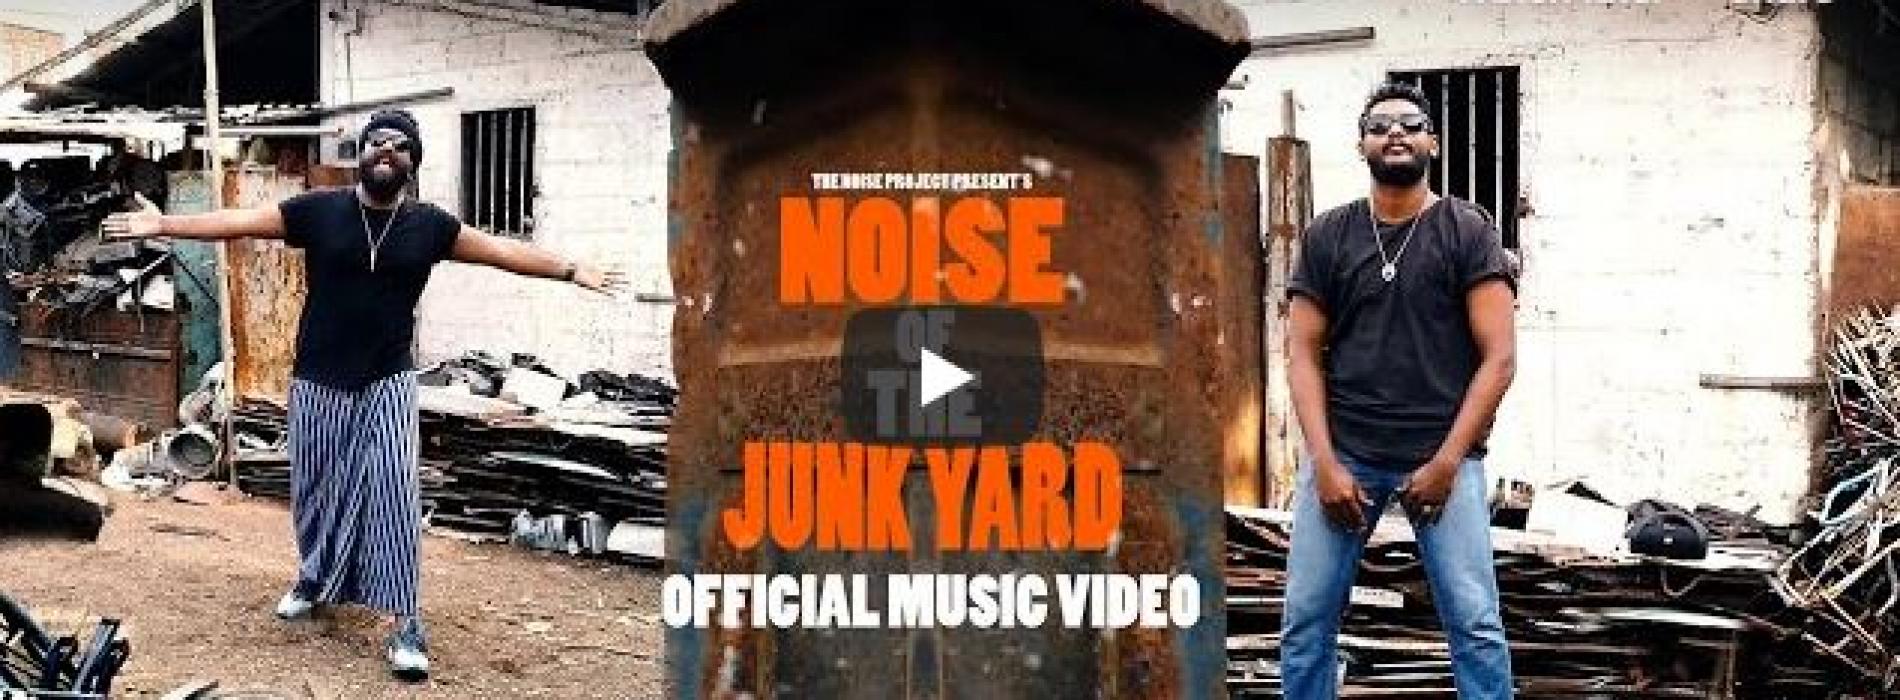 The Noise Project : Noise Of The Junk Yard (Official Music Video)